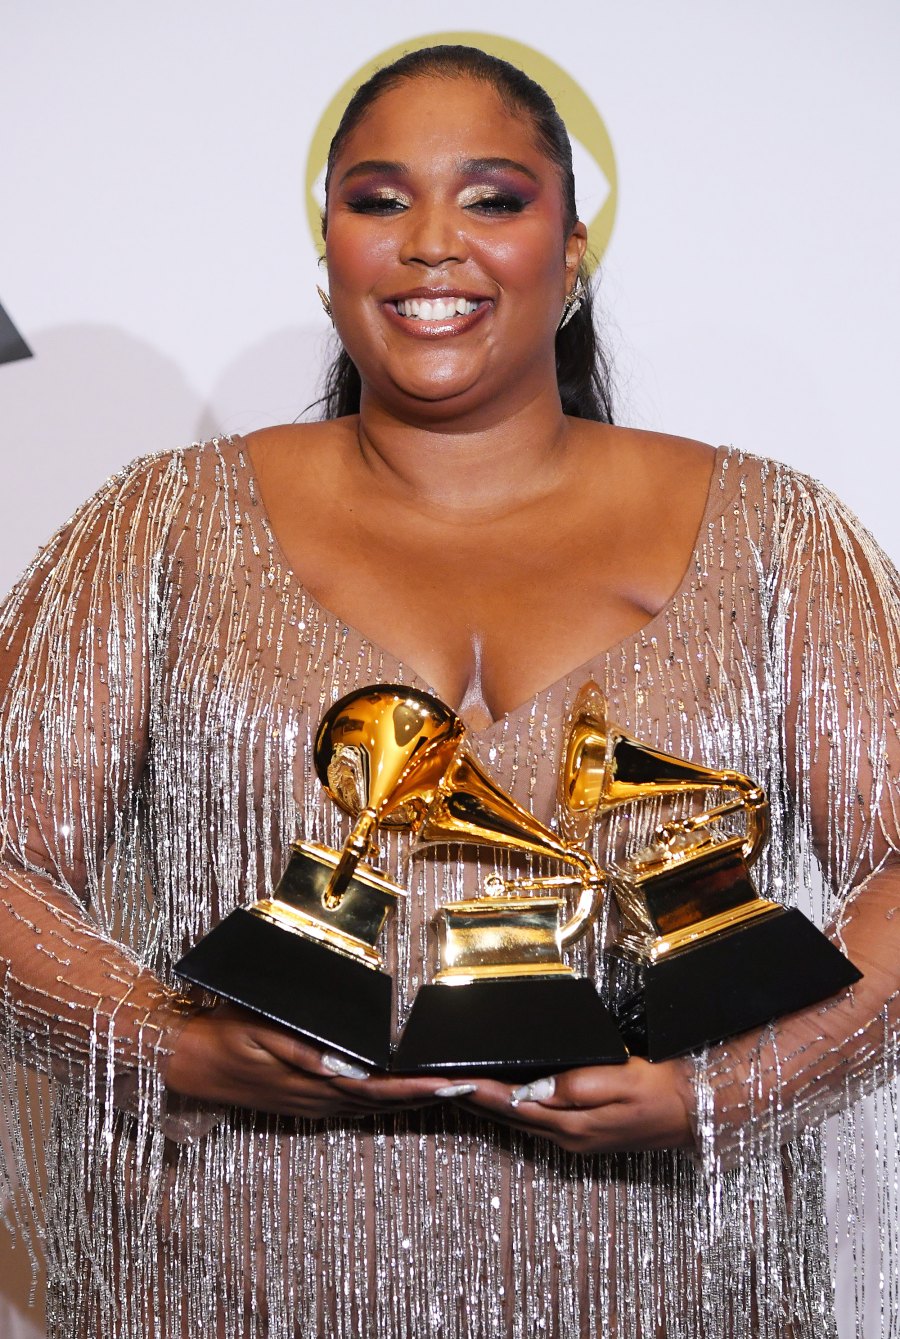 Grammys 2020 Lizzo Fashion, Costume Changes Details